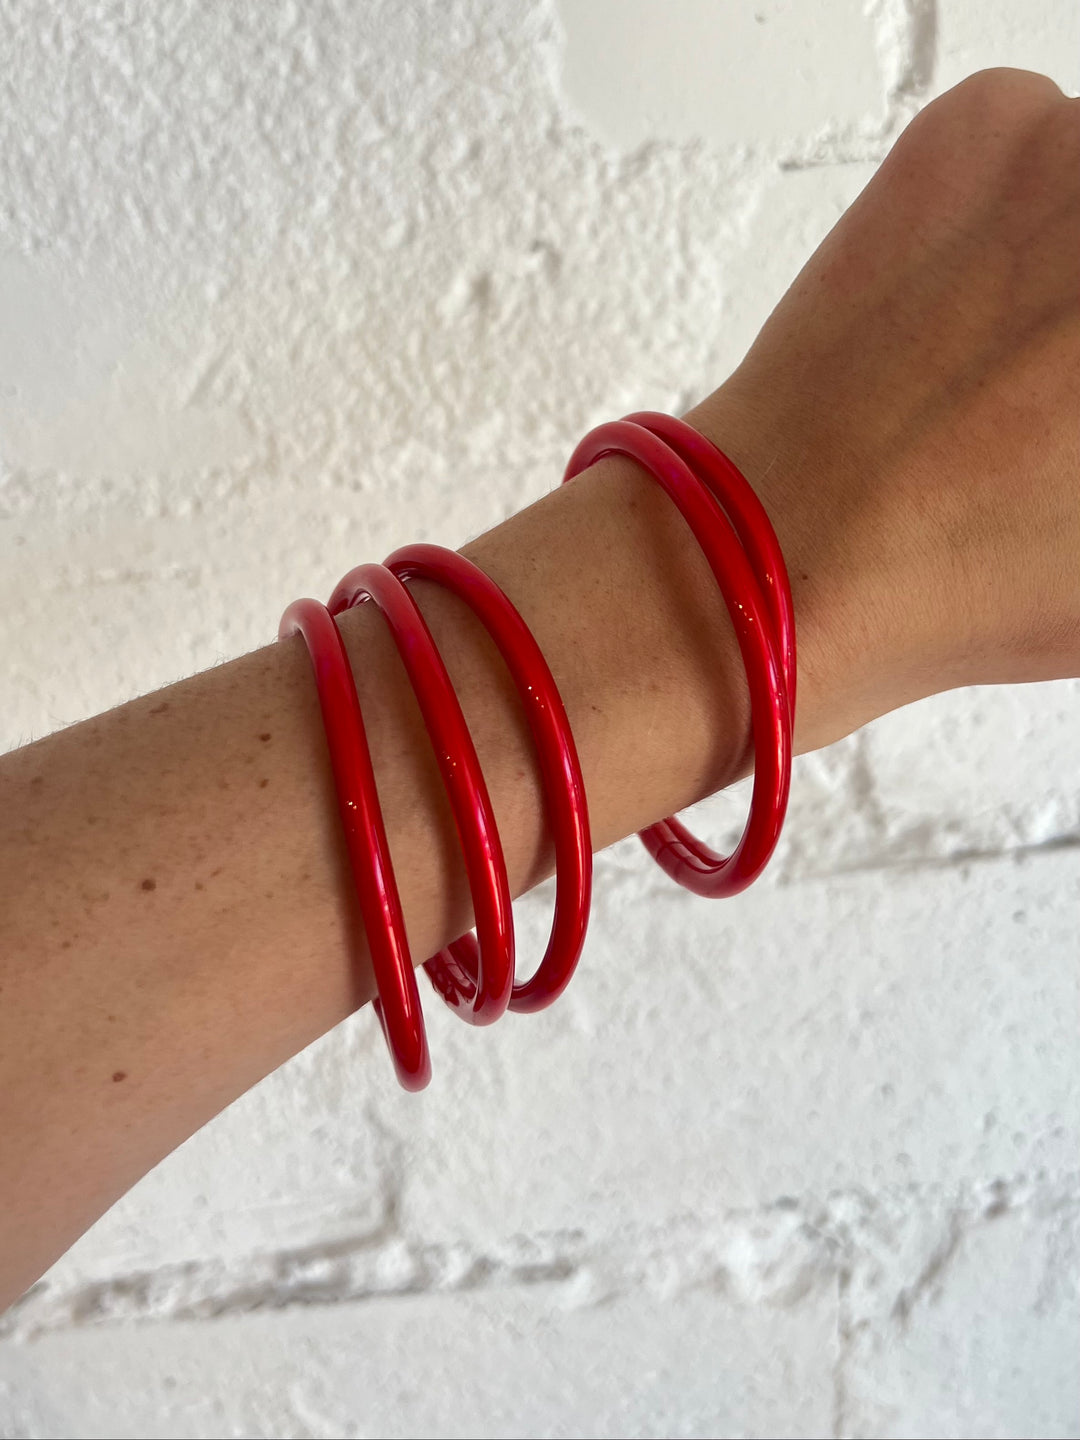 Gameday Bangle Set, Jewelry, Adeline, Adeline, dallas boutique, dallas texas, texas boutique, women's boutique dallas, adeline boutique, dallas boutique, trendy boutique, affordable boutique